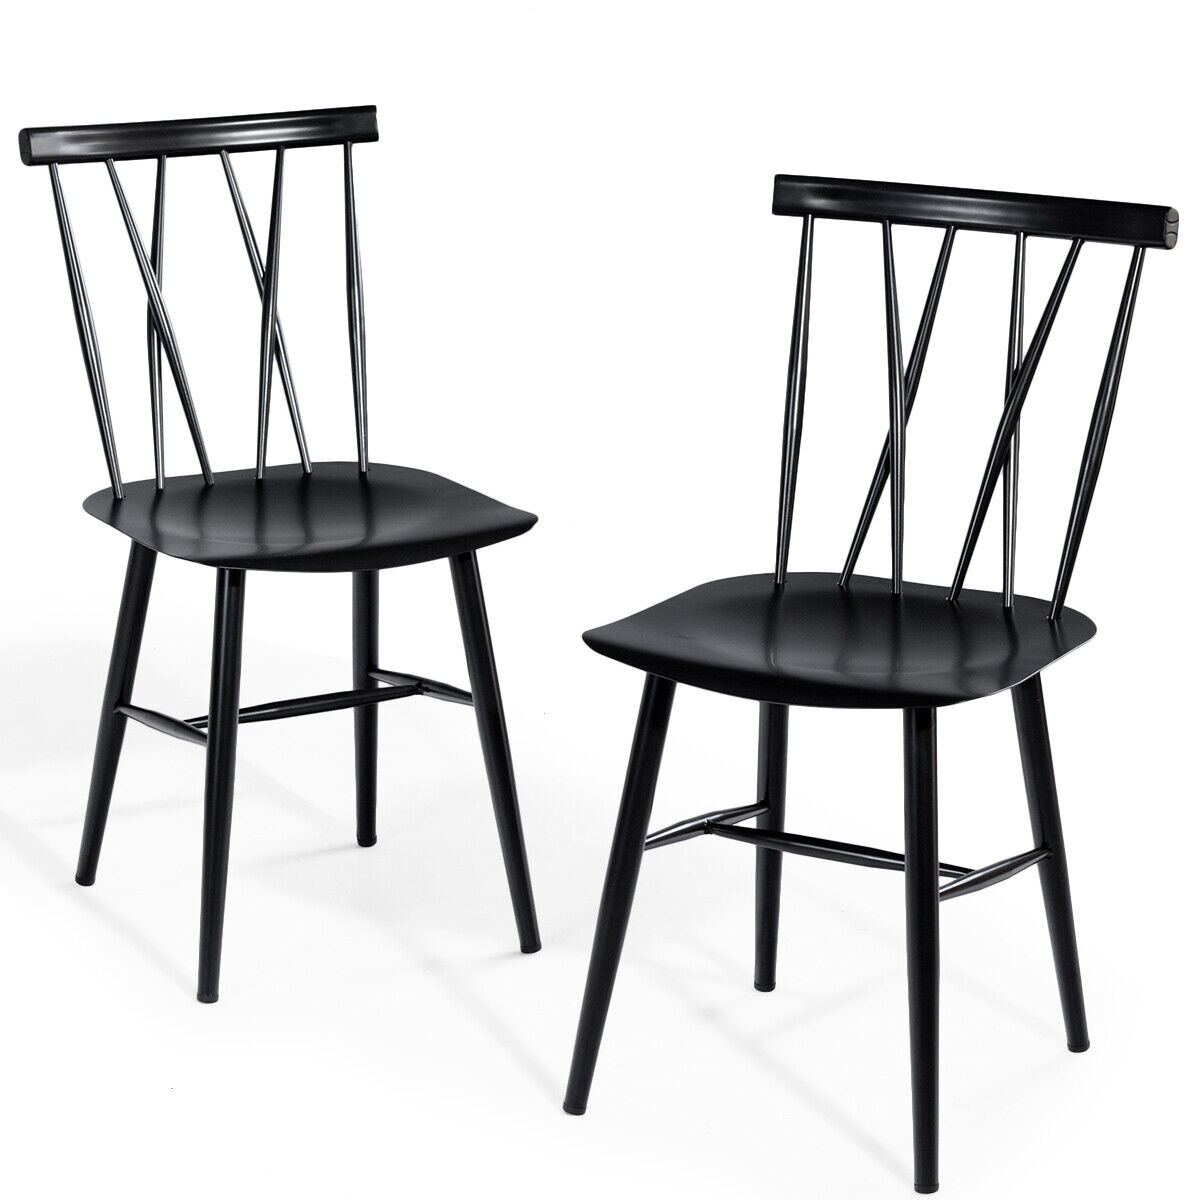 Set of 2 Steel Dining Chairs with Curved Backrest for Restaurant/Cafe